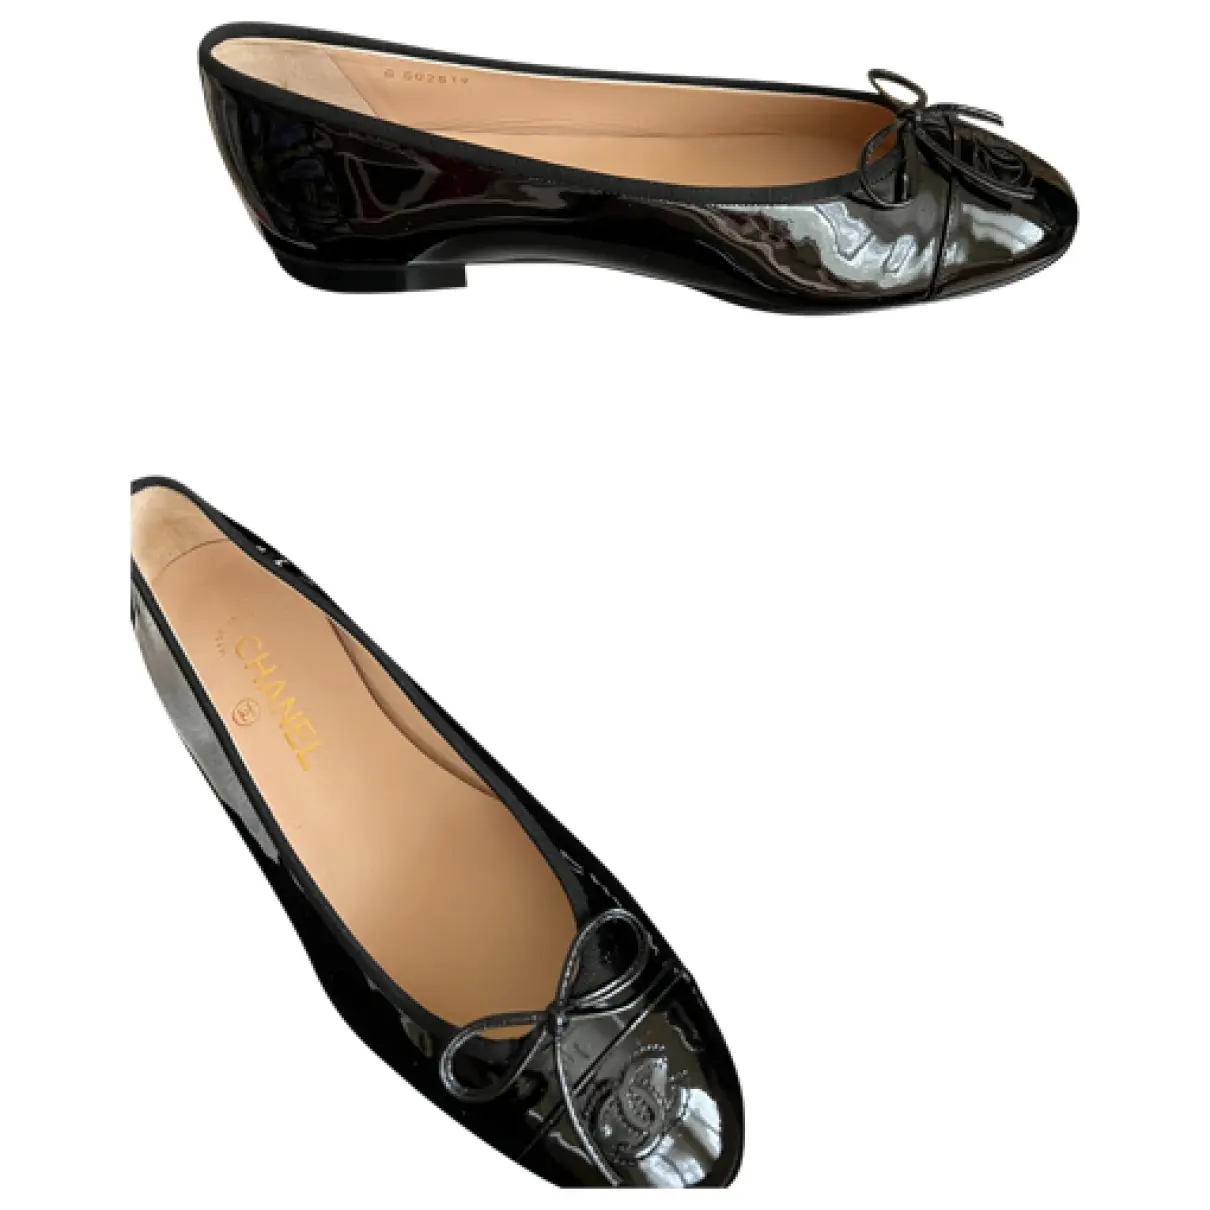 Chanel Women's Loafers  Buy or Sell your Shoes online! - Vestiaire  Collective